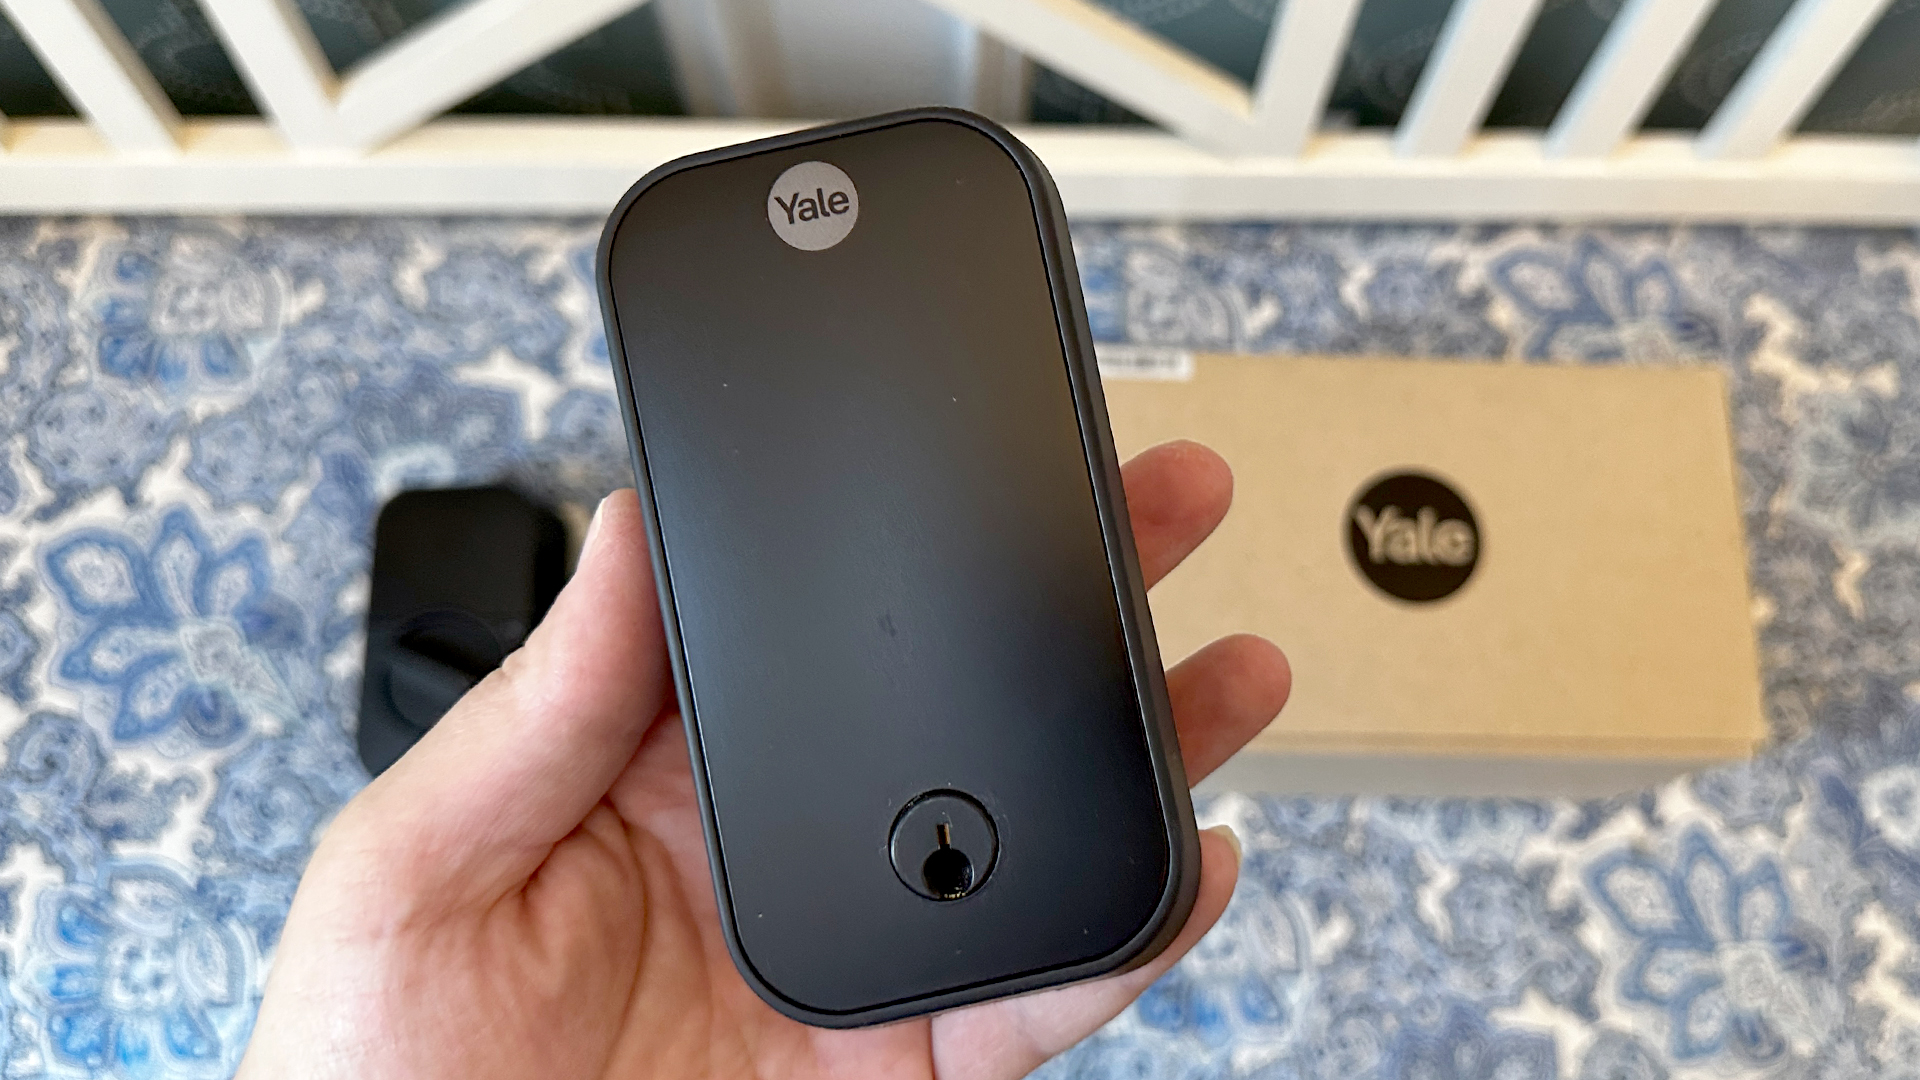 Yale Assure Lock 2 Smart Lock Review: Attractive but not flawless - Reviewed